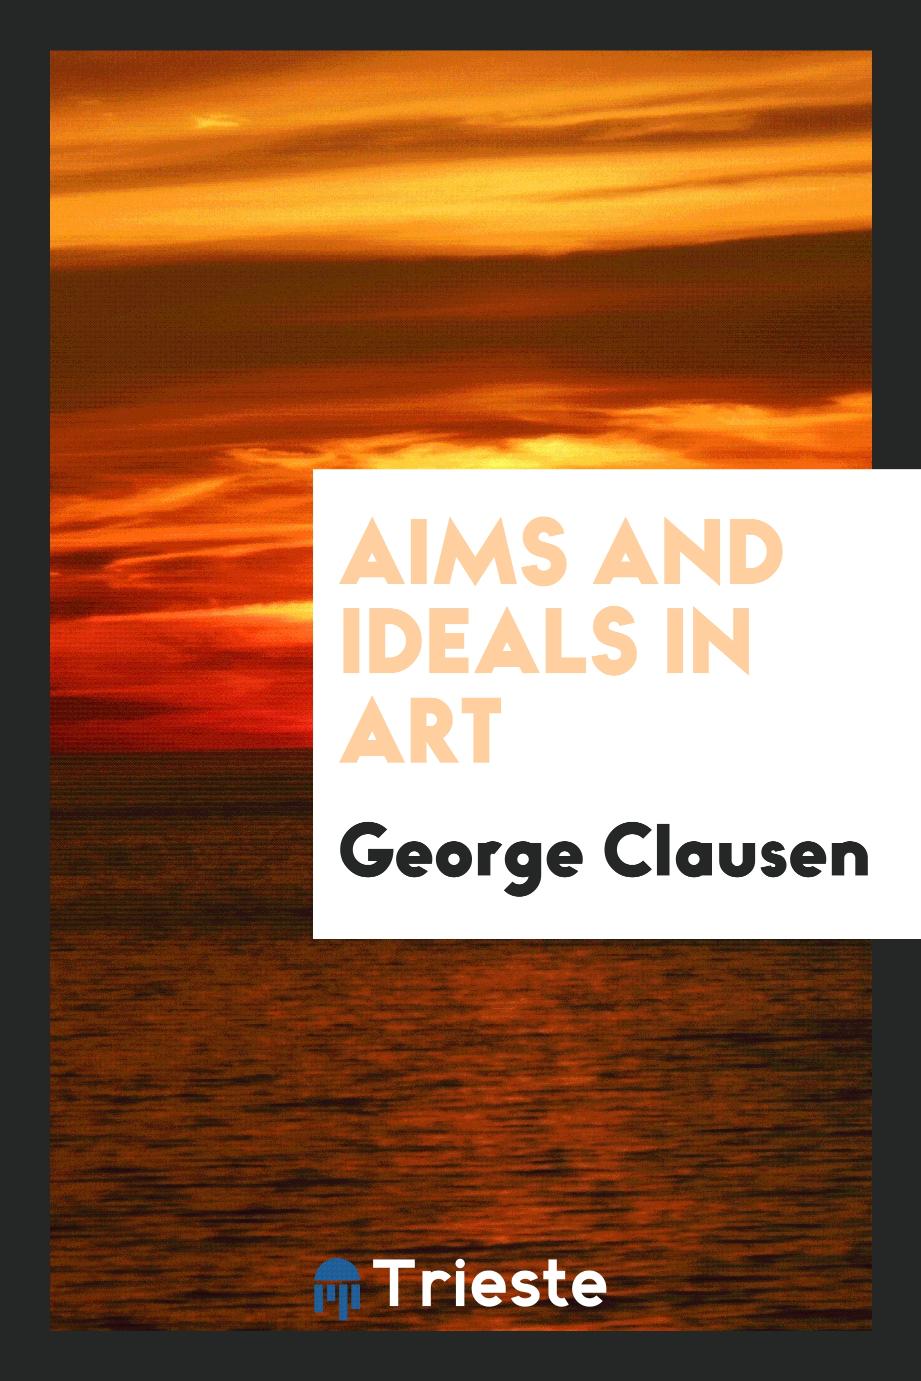 Aims and ideals in art